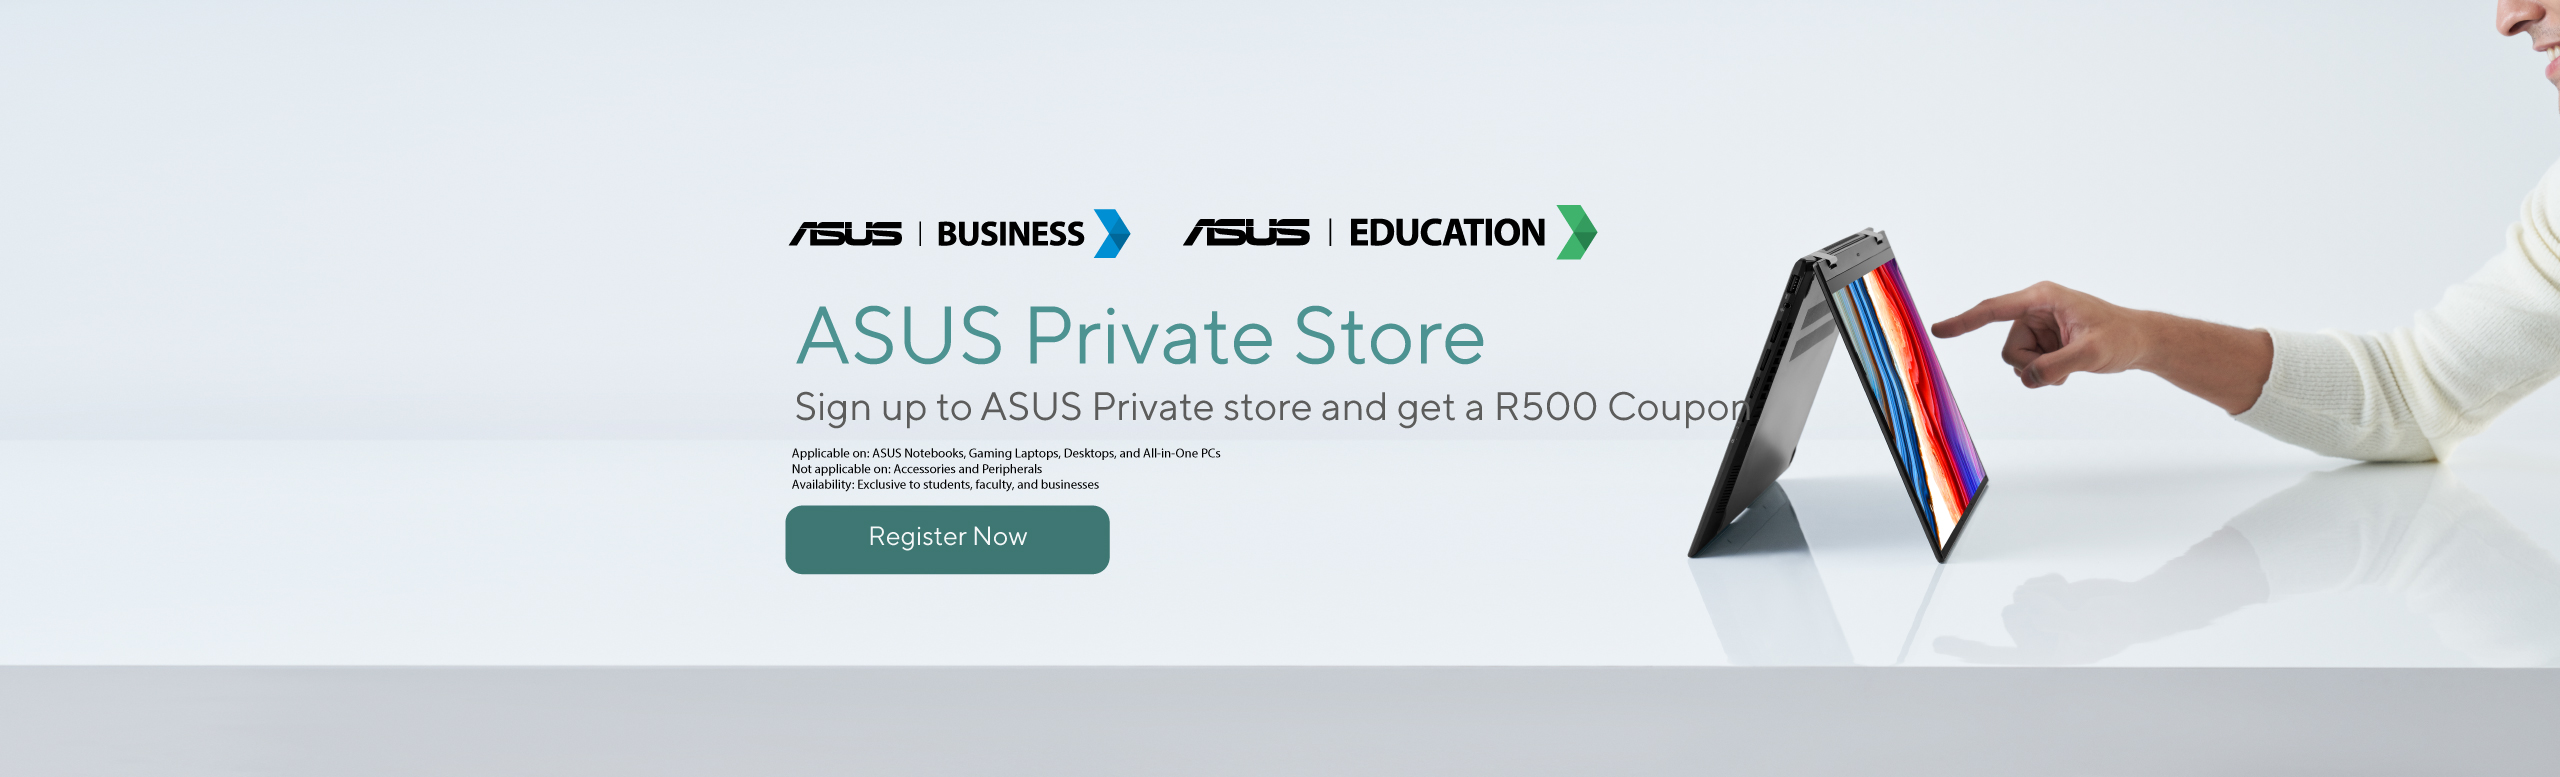 ASUS Business and School Deals